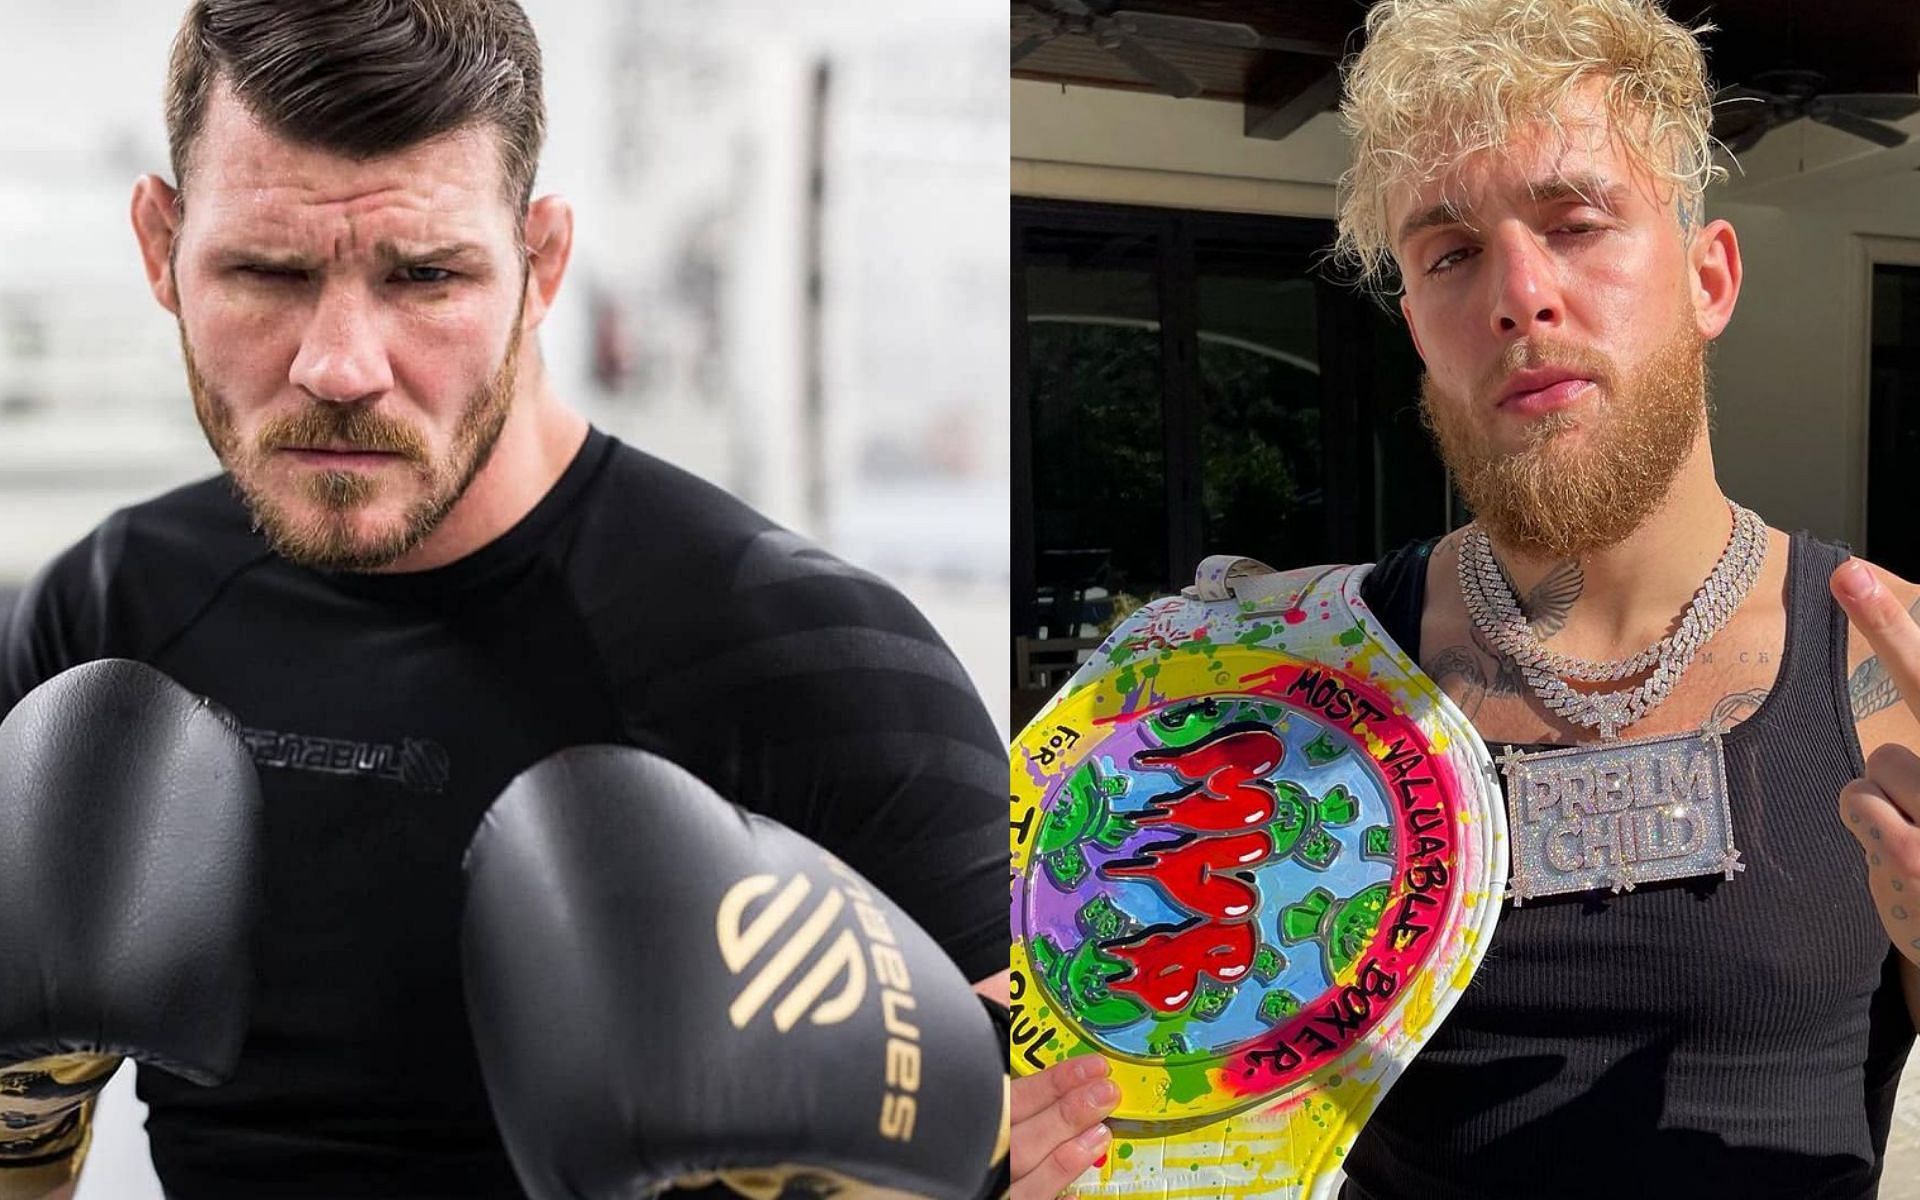 Michael Bisping (left) and Jake Paul (right) [Images via @michaelbisping_ and @jakepaul on Instagram]